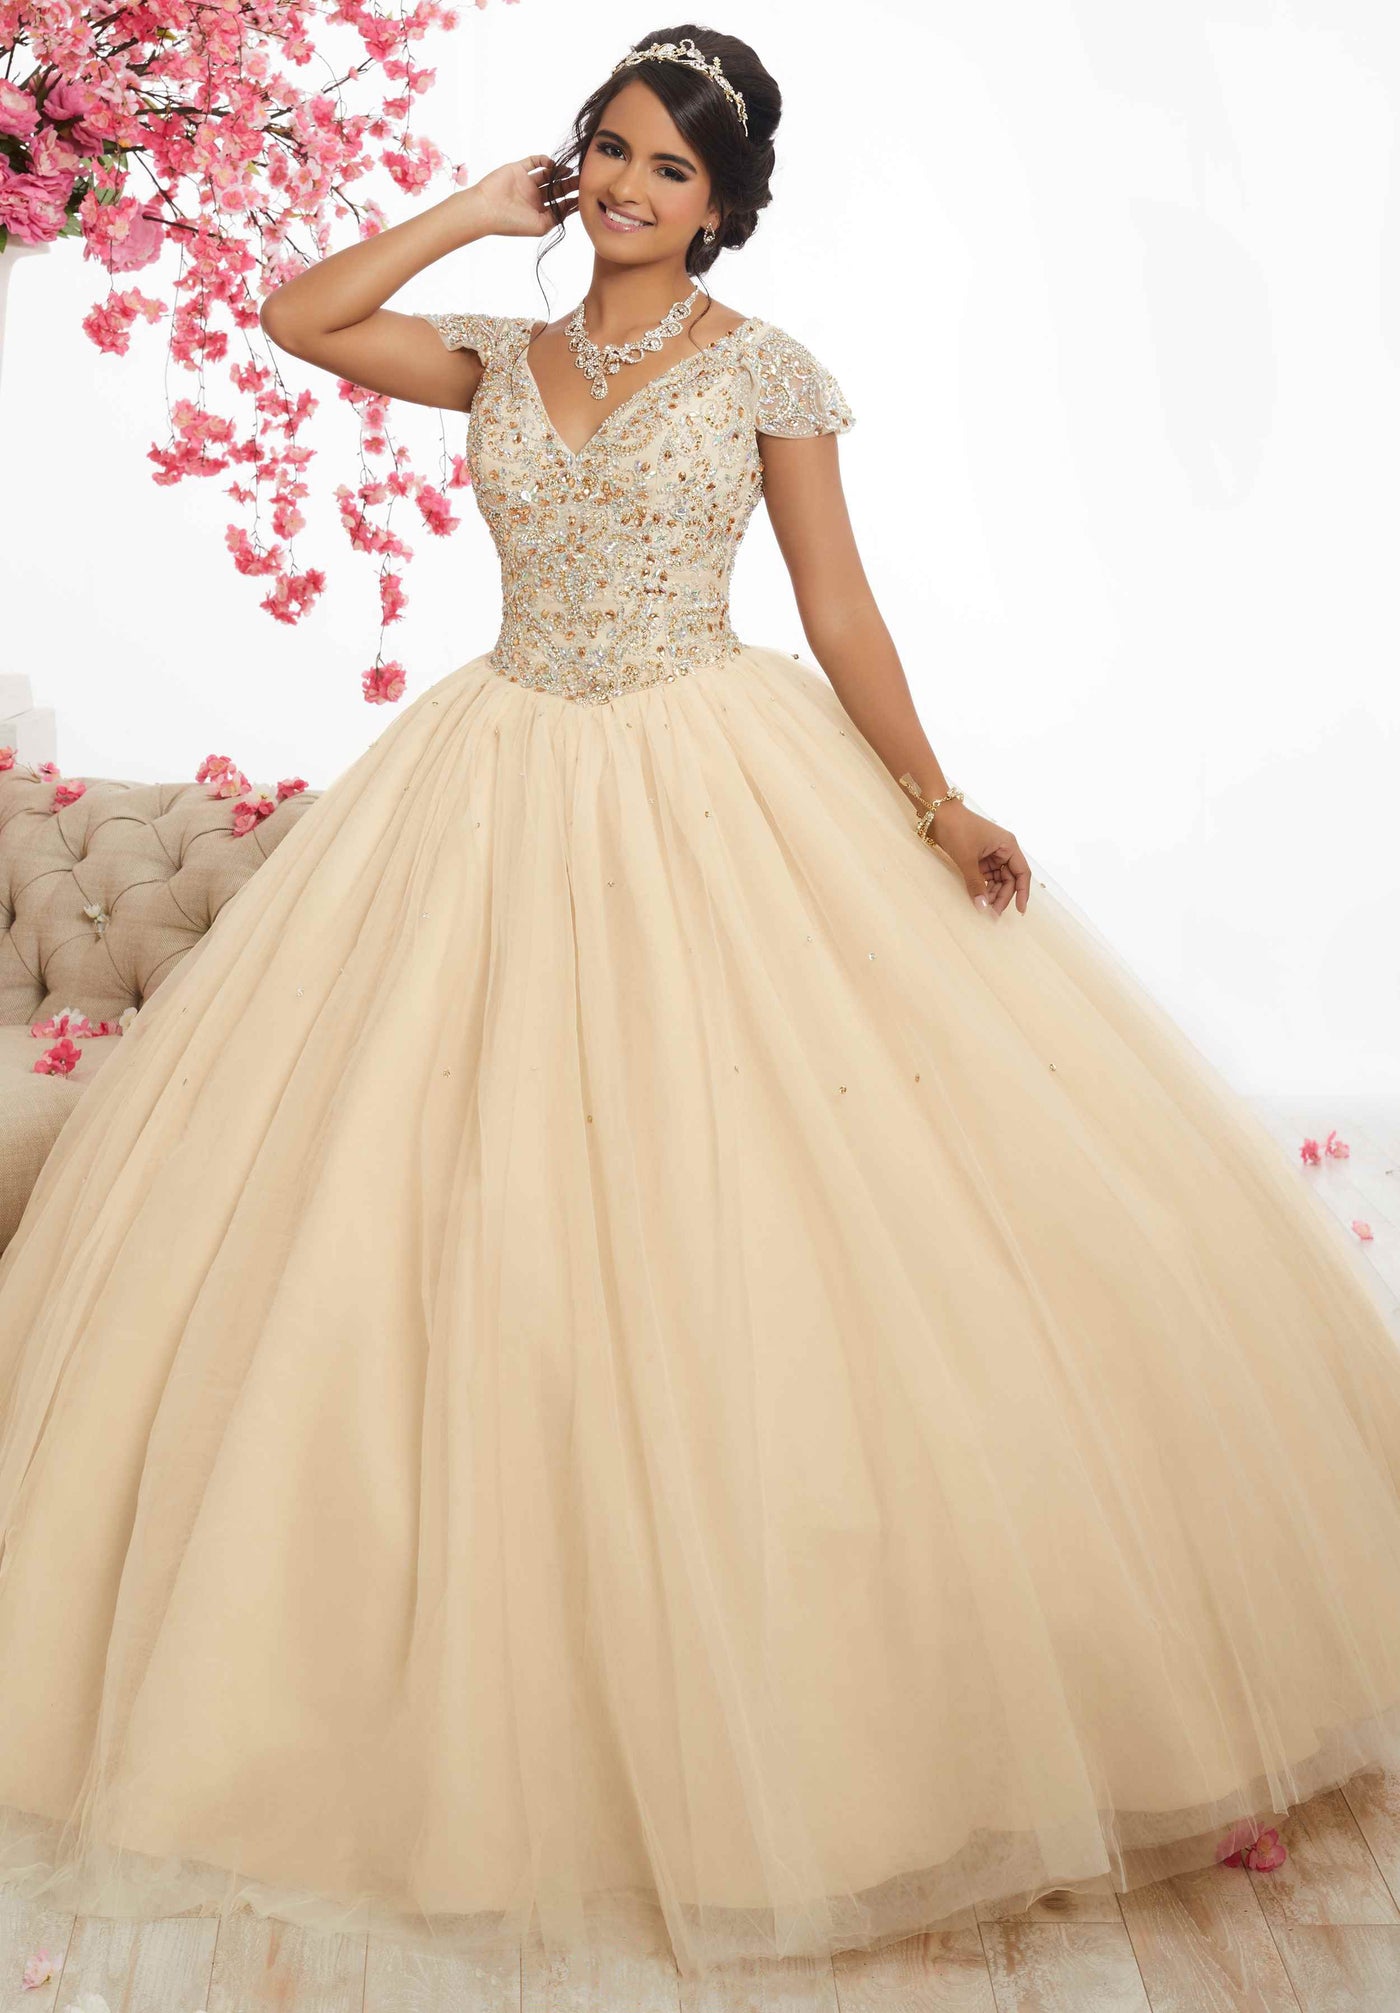 Fiesta Gowns - 56335 Beaded V-neck Tulle Ballgown Special Occasion Dress 0 / Champagne